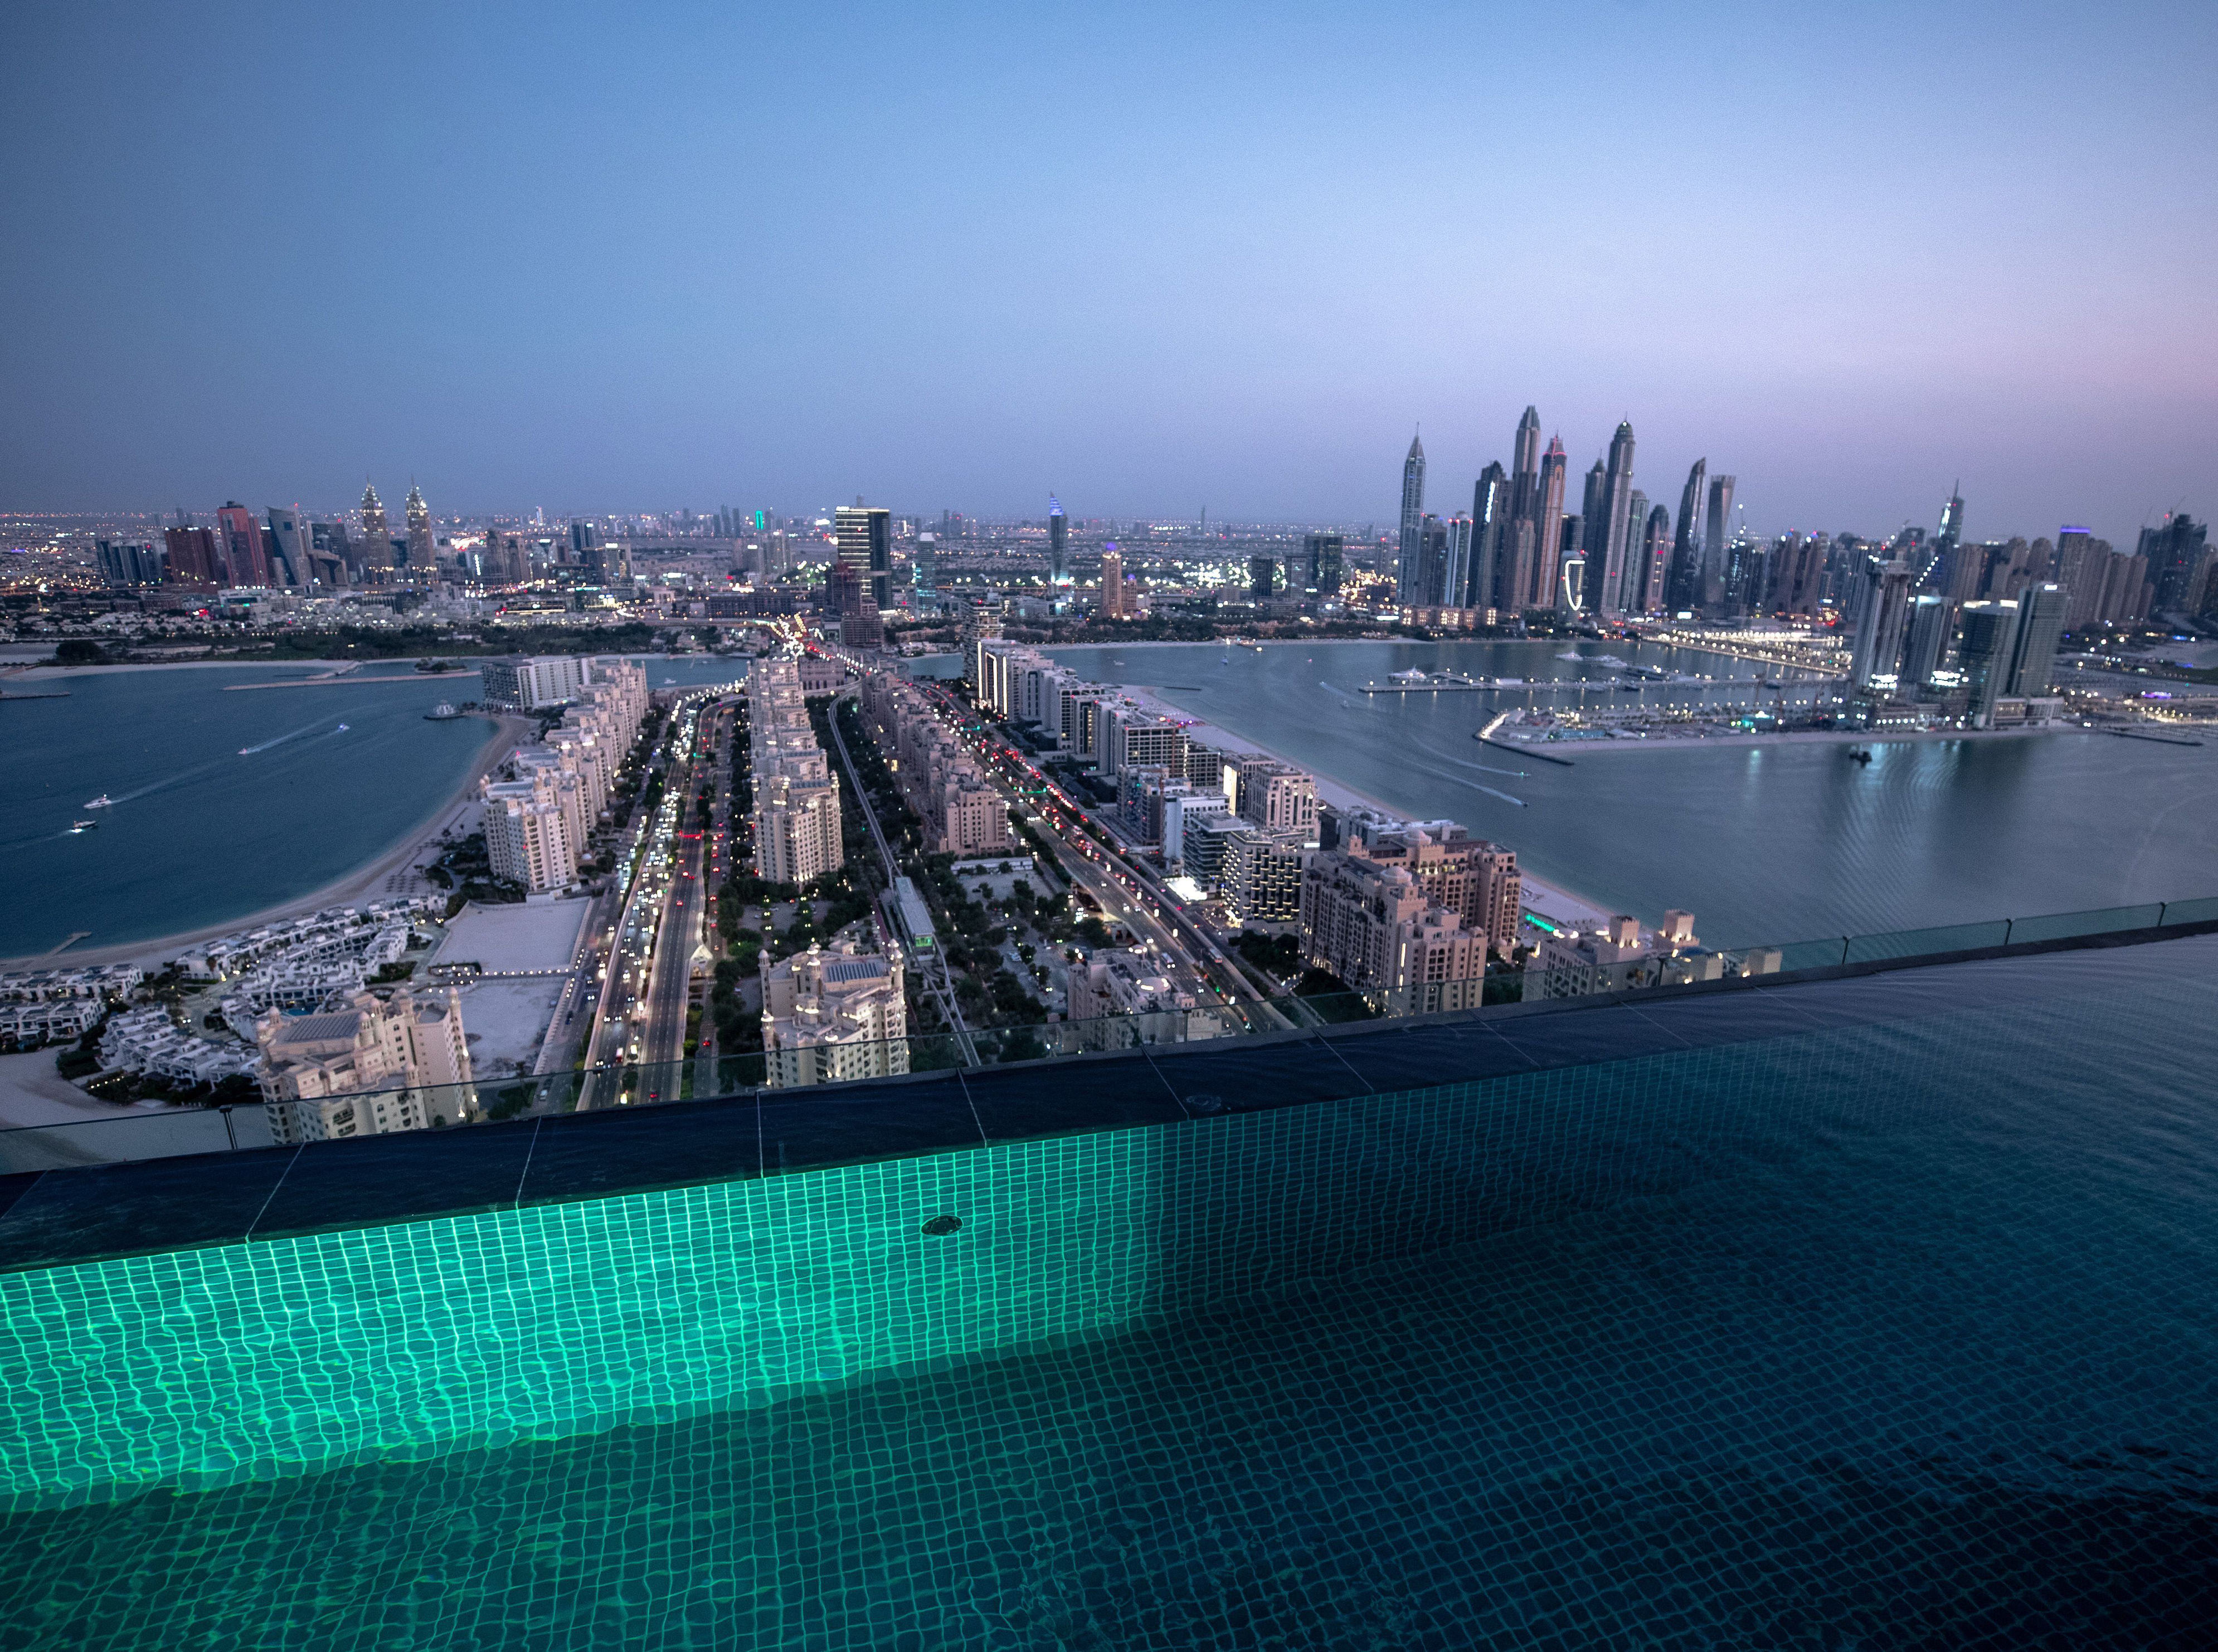 record-breaking swimming pools around the world, from dubai to london